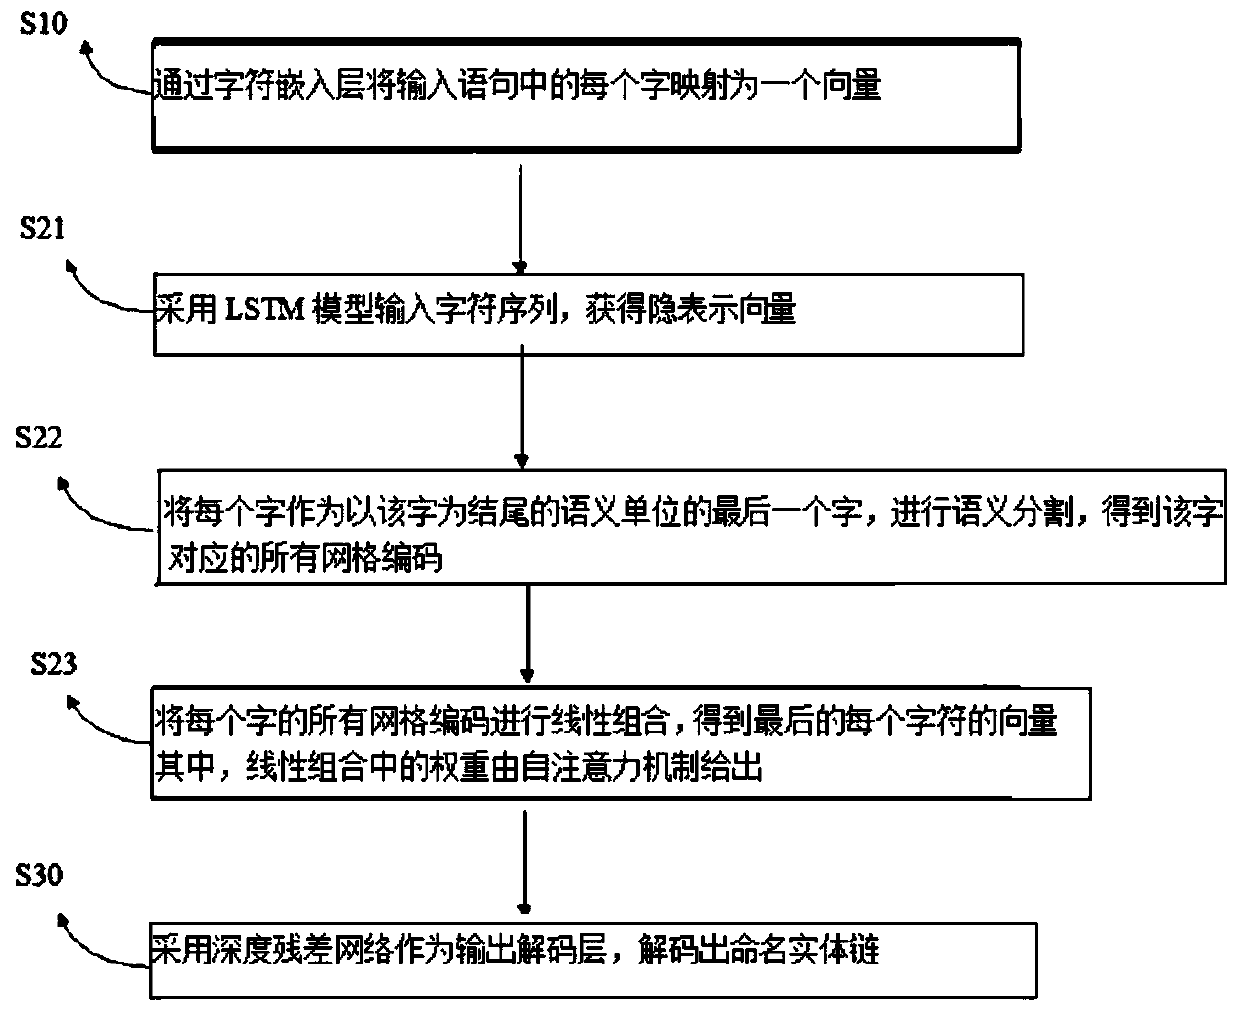 Chinese electronic medical record named entity extraction method and system